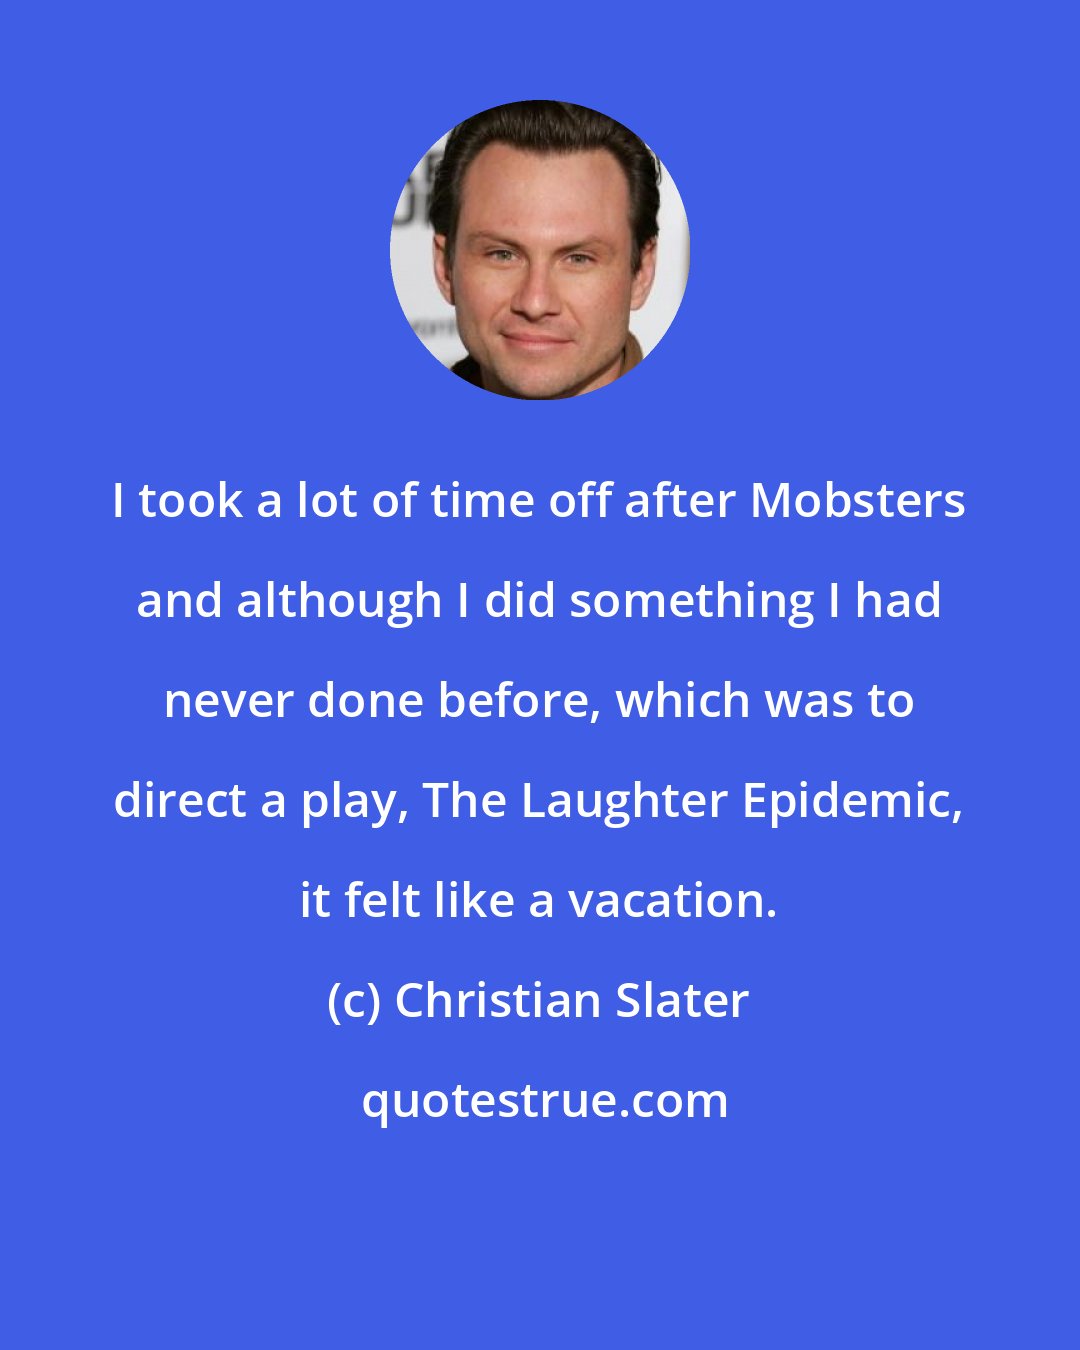 Christian Slater: I took a lot of time off after Mobsters and although I did something I had never done before, which was to direct a play, The Laughter Epidemic, it felt like a vacation.